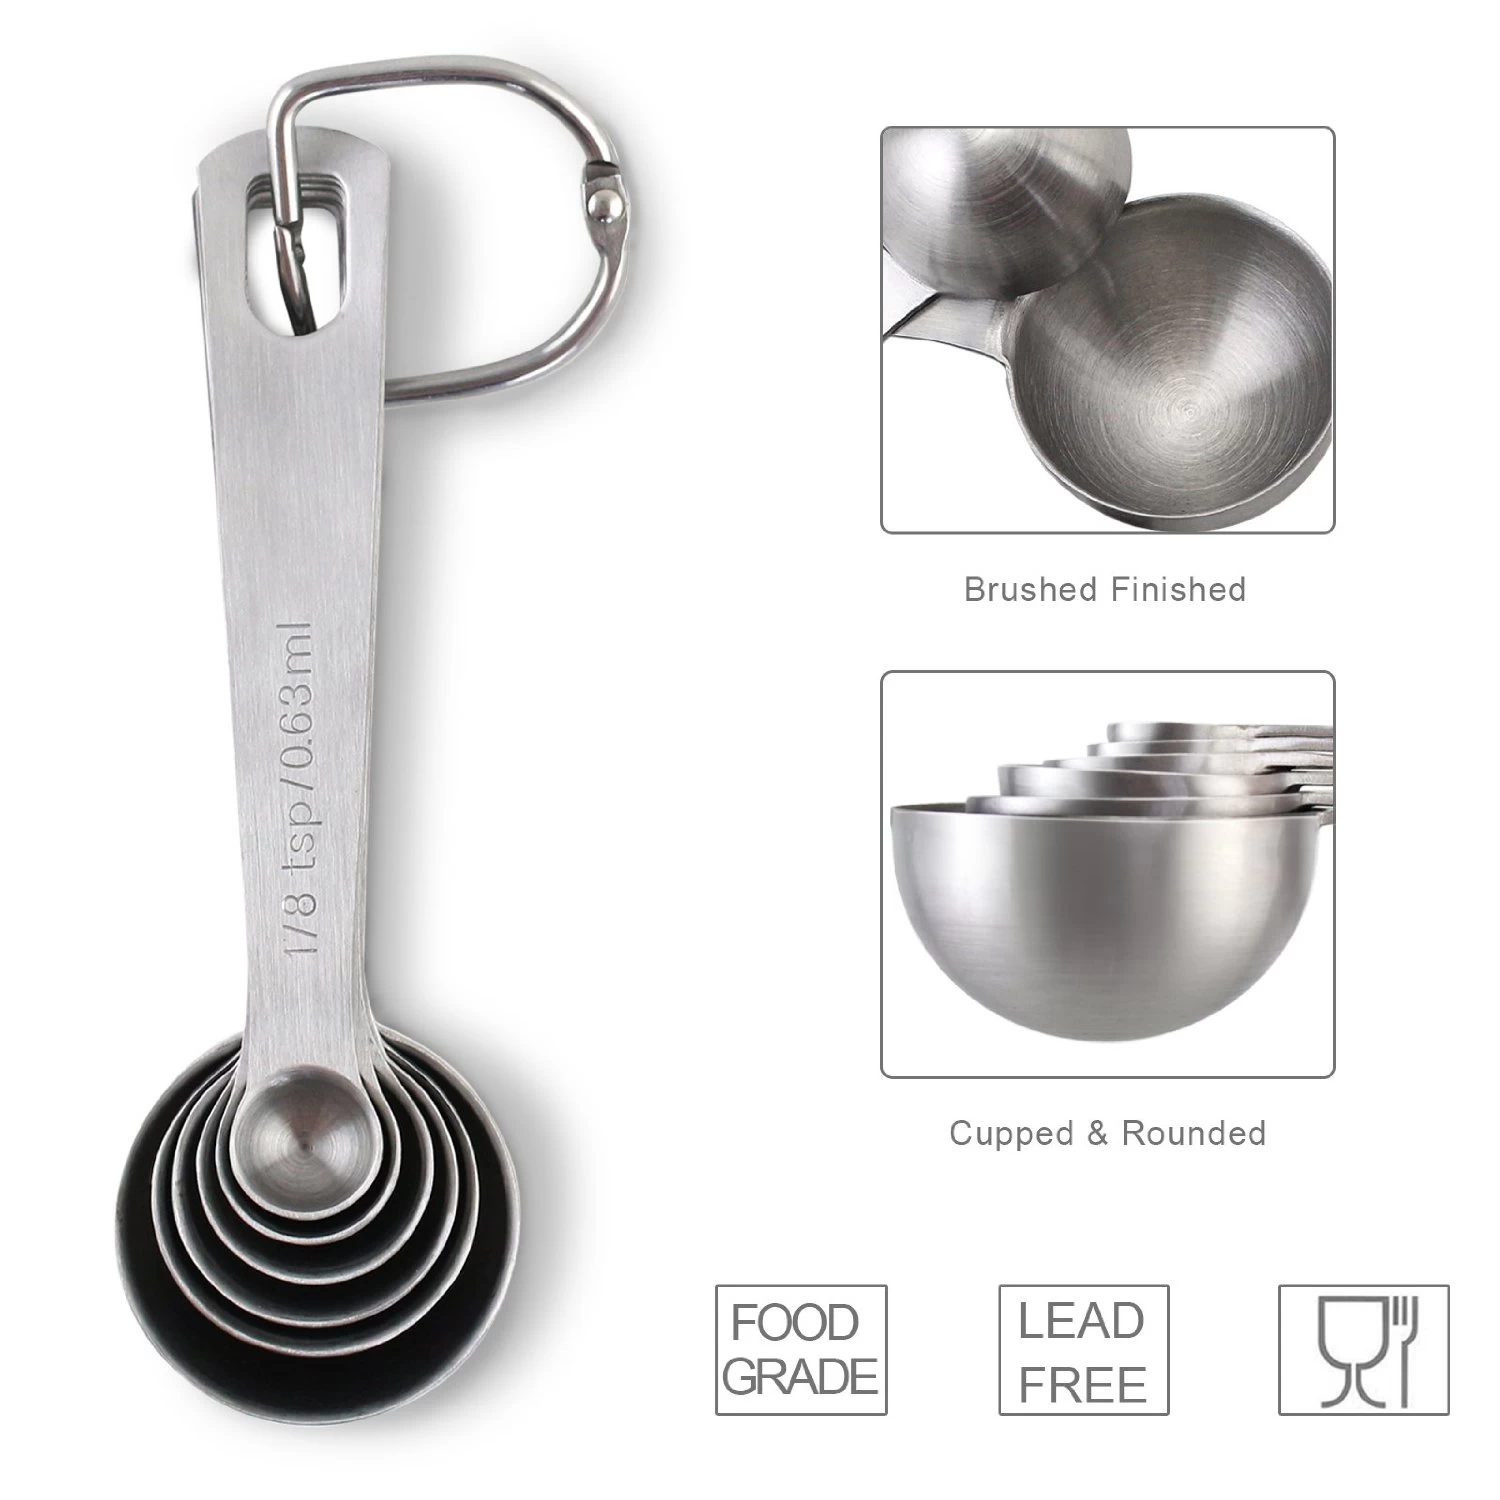 oem Stainless Steel Mearsuring Spoon, Stainless Steel Mearsuring Spoon supplier